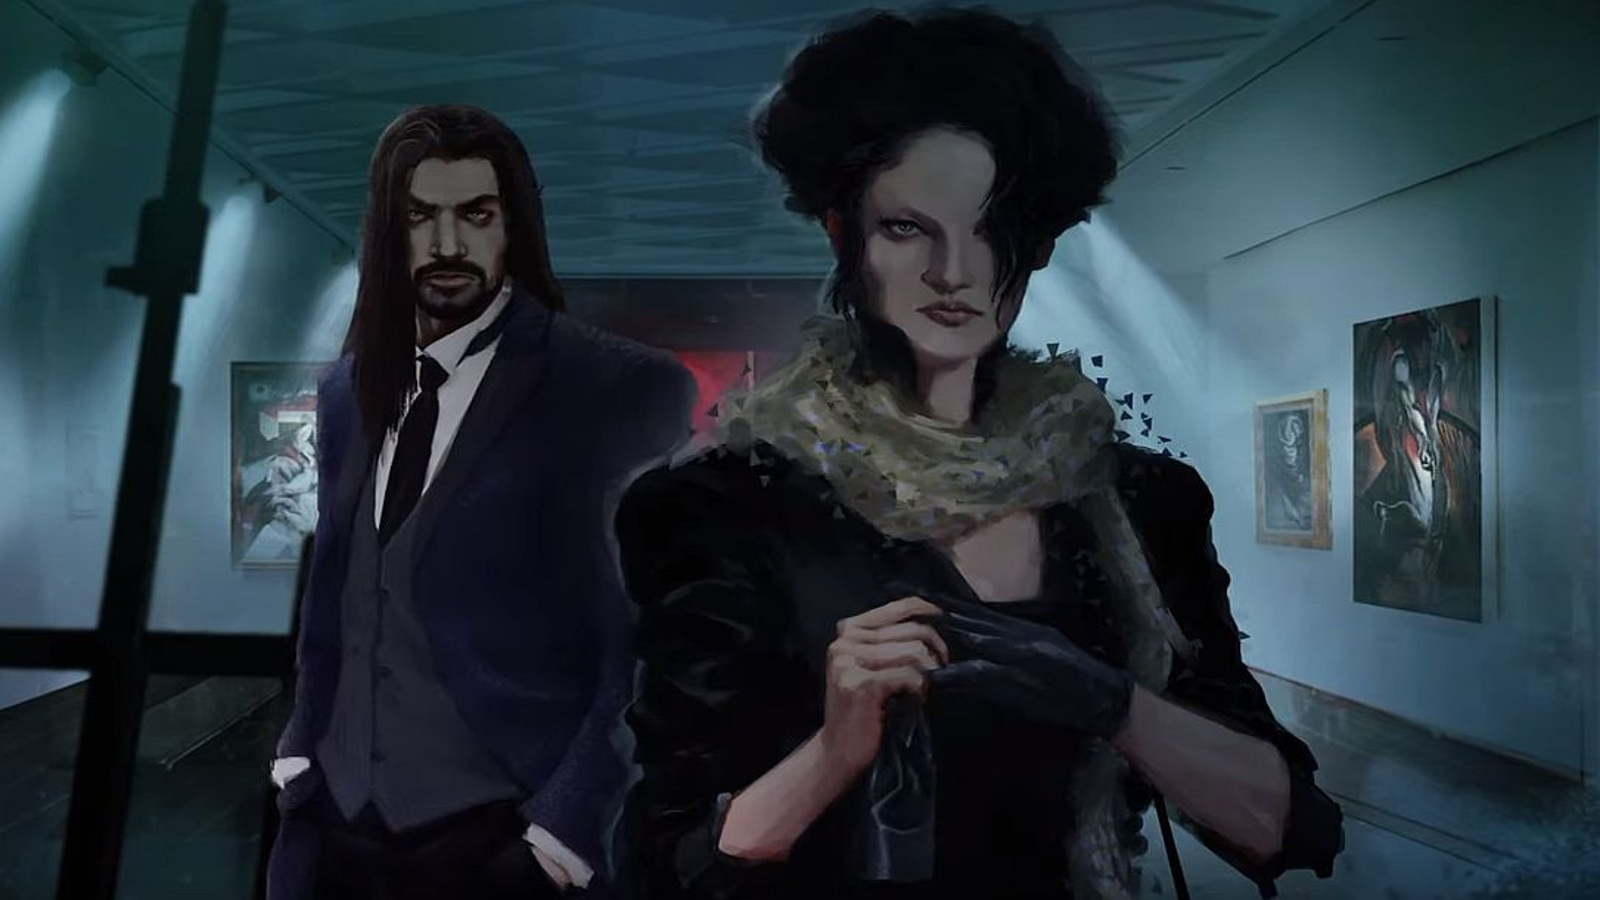 Vampire: The Masquerade - Coteries of New York review